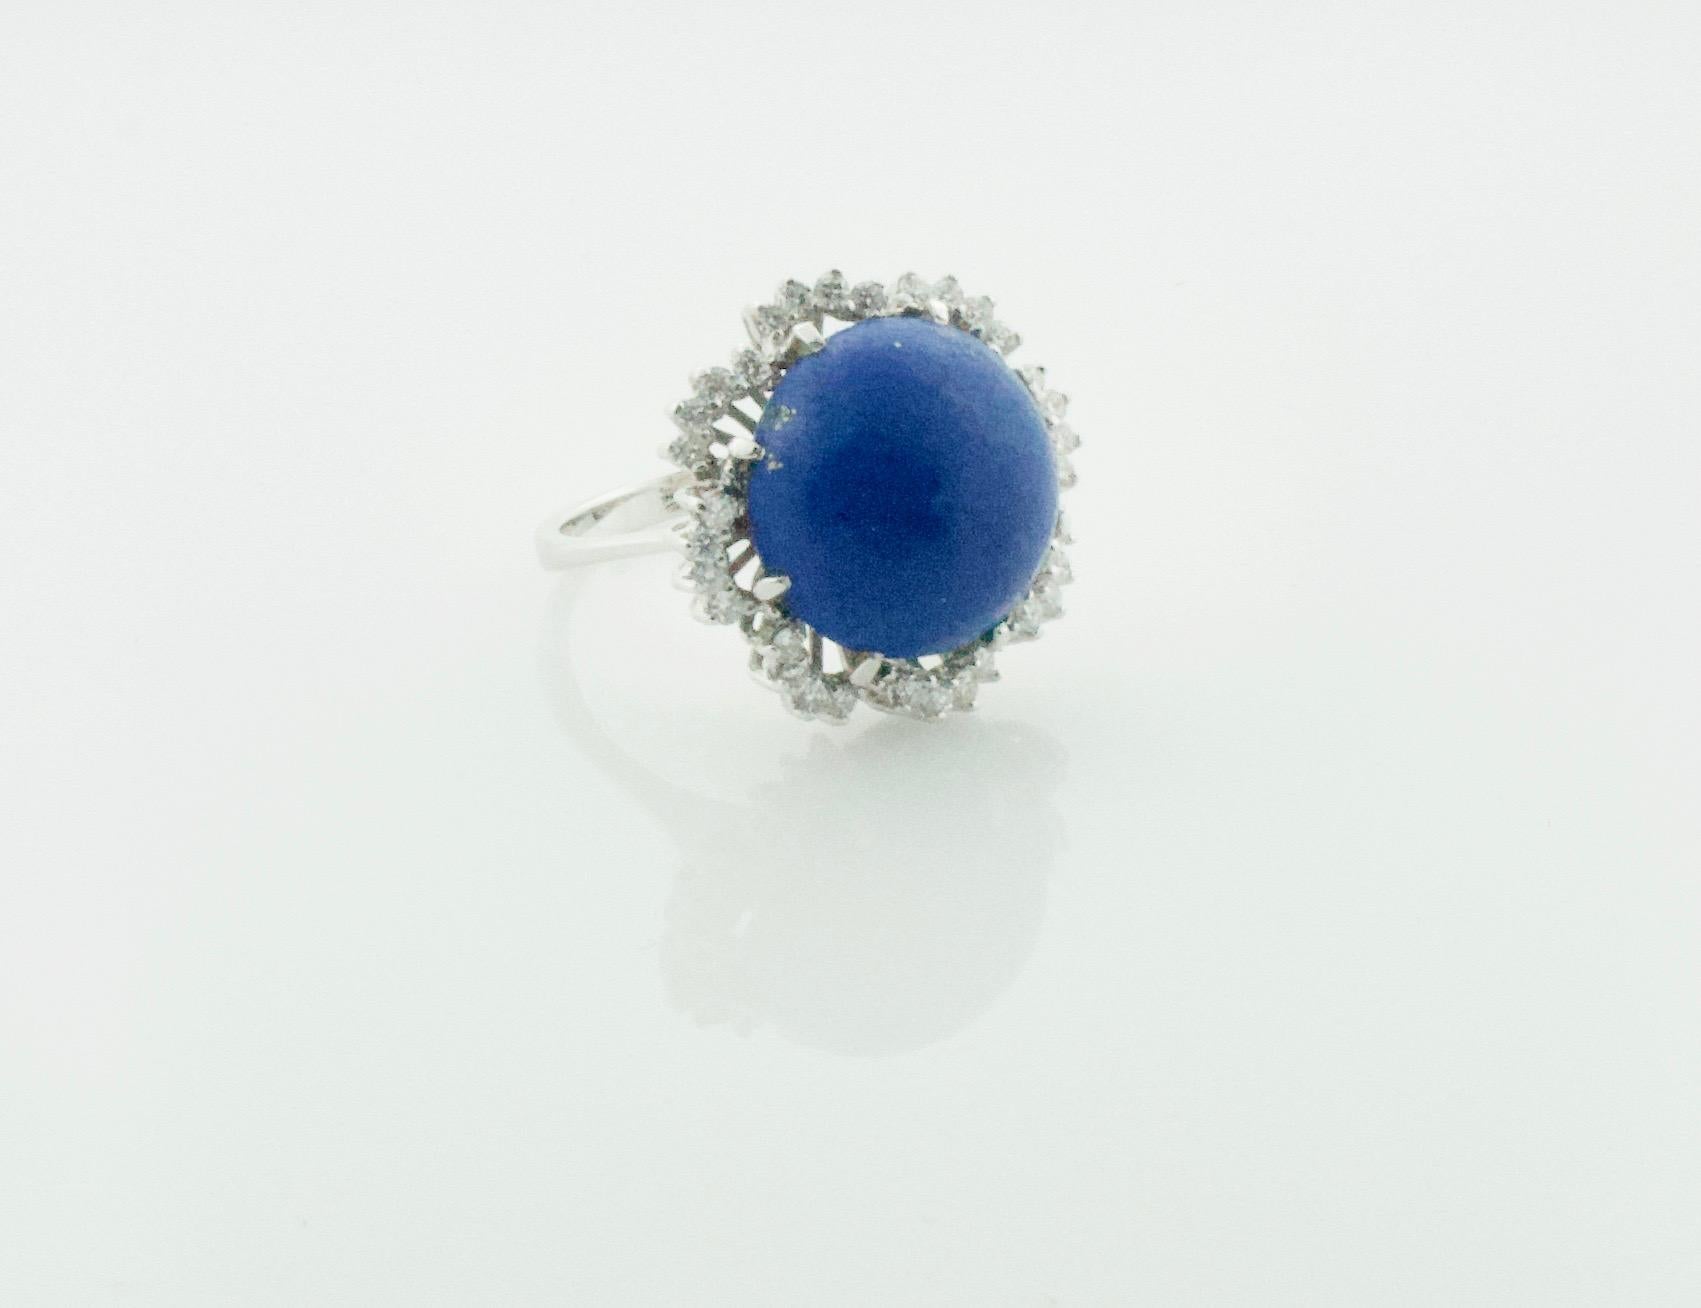 Lapis Lazuli and Diamond Dome Ring In White Gold Circa 1960's
One Round Cabochon Lapis Lazuli 14.7 mm
32 Round Brilliant Cut Diamonds Weighing .35 Carats Approximately [GH VVS-VS1]

